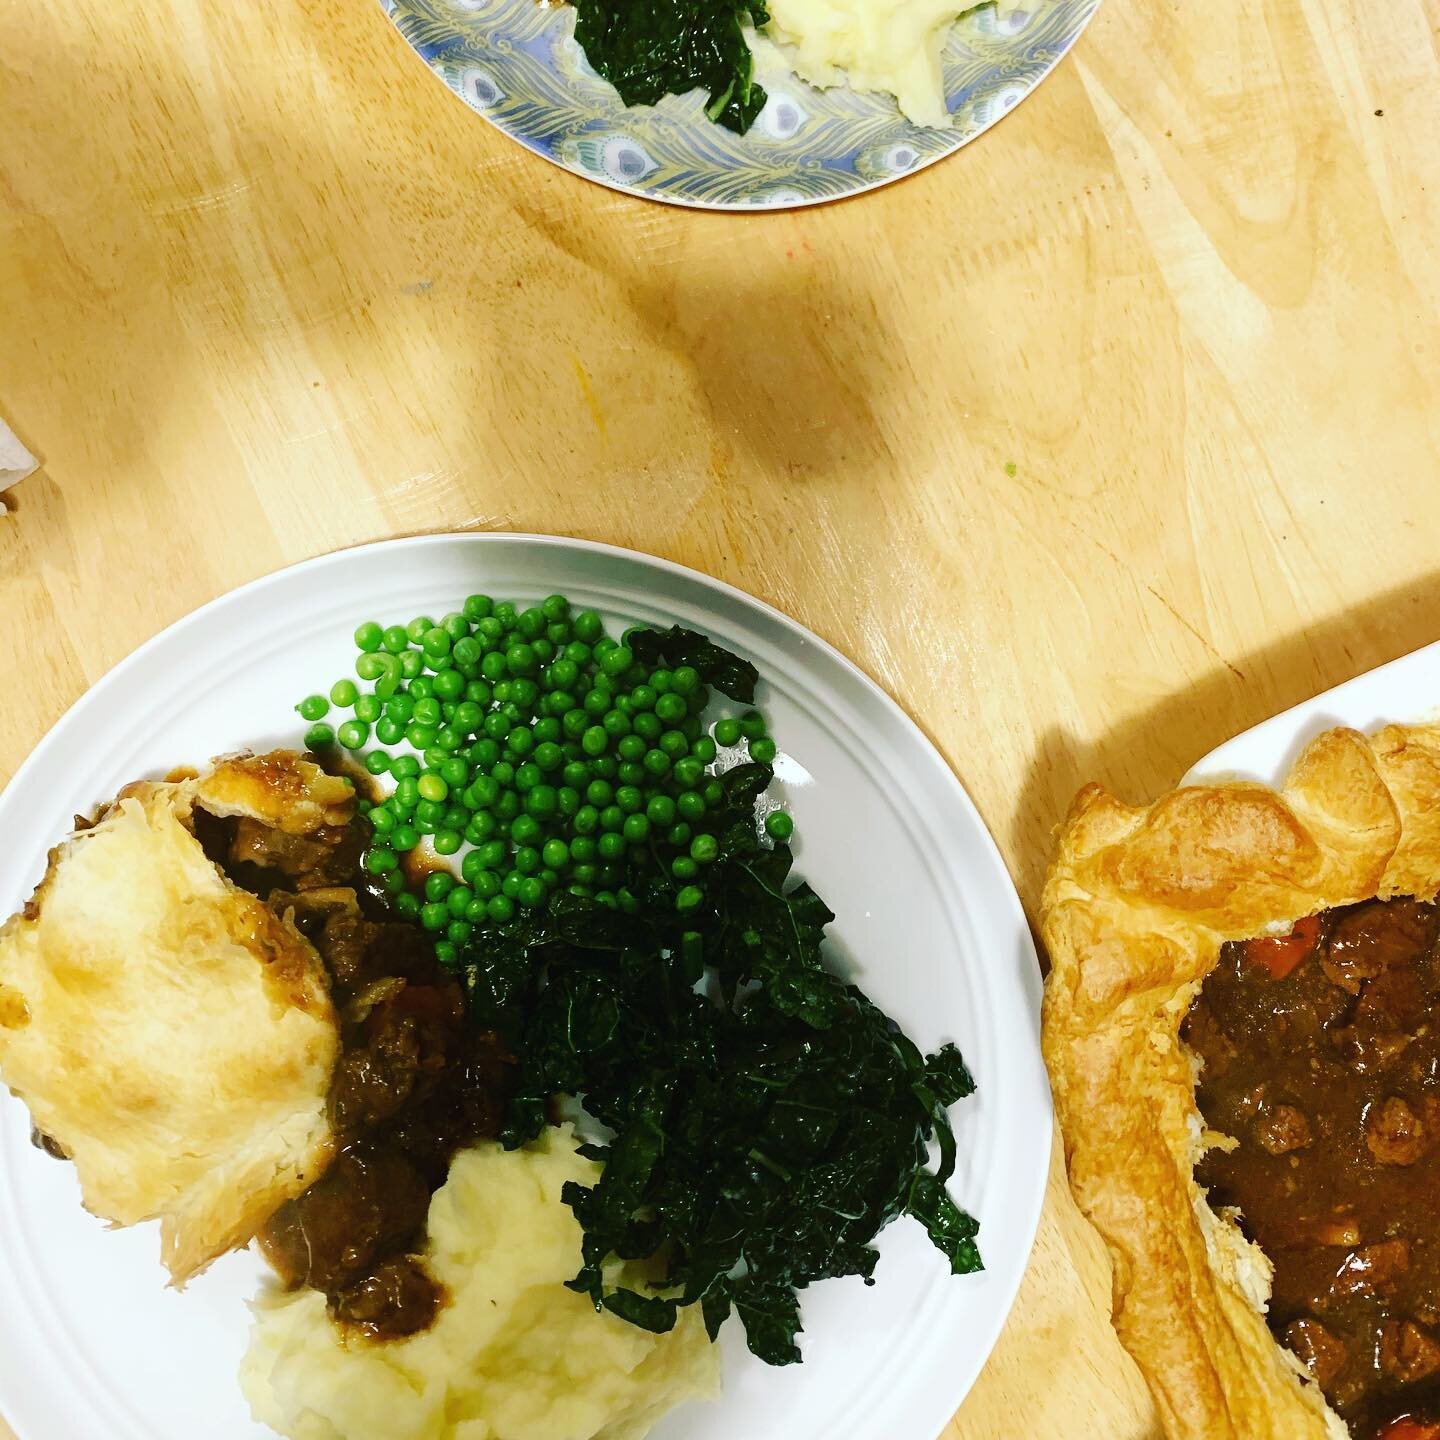 Sometimes you just need pie and mash. This one is steak and ale- with tonnes of shiitake mushrooms. #wednesday #pieandmash #pie #winterfood #comfortfood #simple #delicious